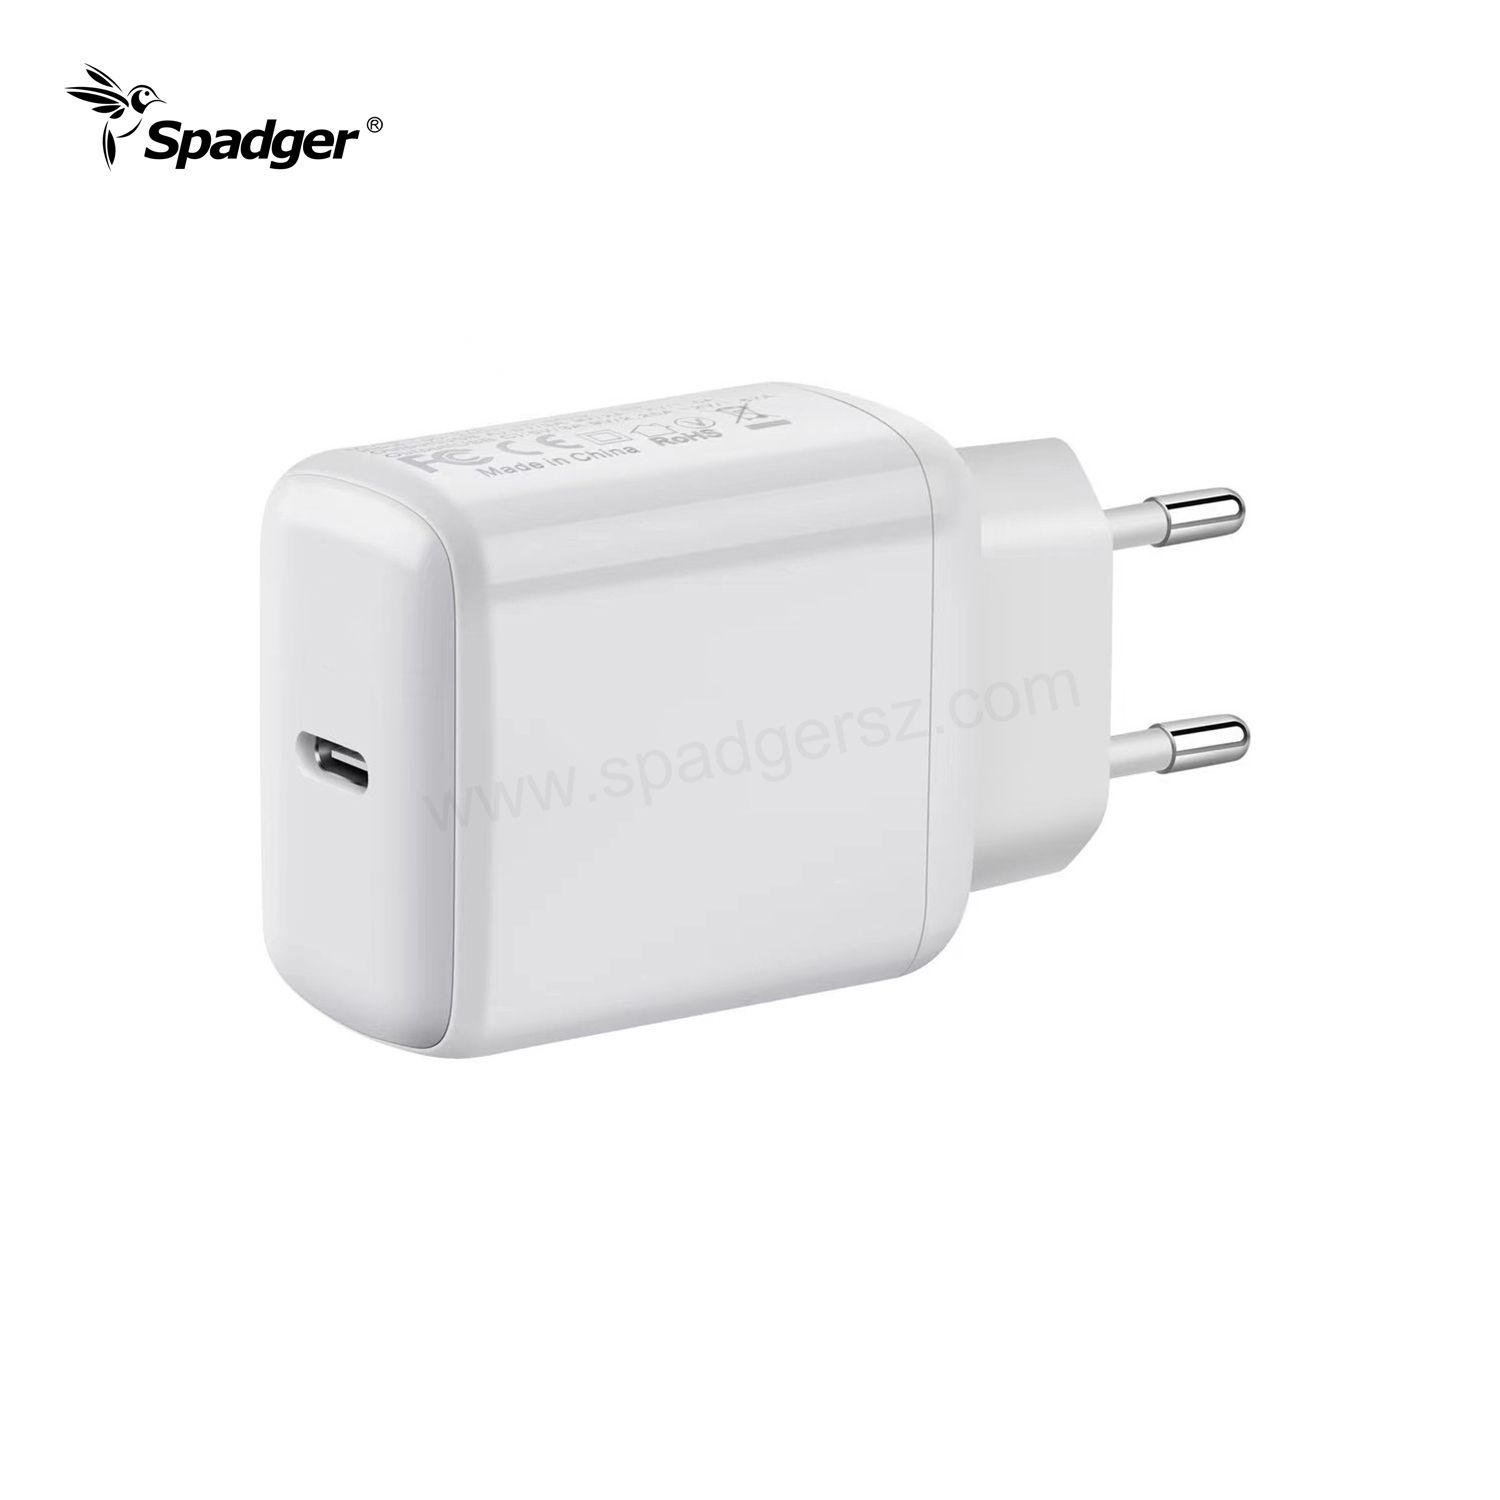 Low MOQ for Type-C Fast Charging Adapter 18W - Original Factory TYPE-C Fast Charger PD30W Travel charger USB C USB C Mobile Phone Charger UK US AU EU Plug – Spadger